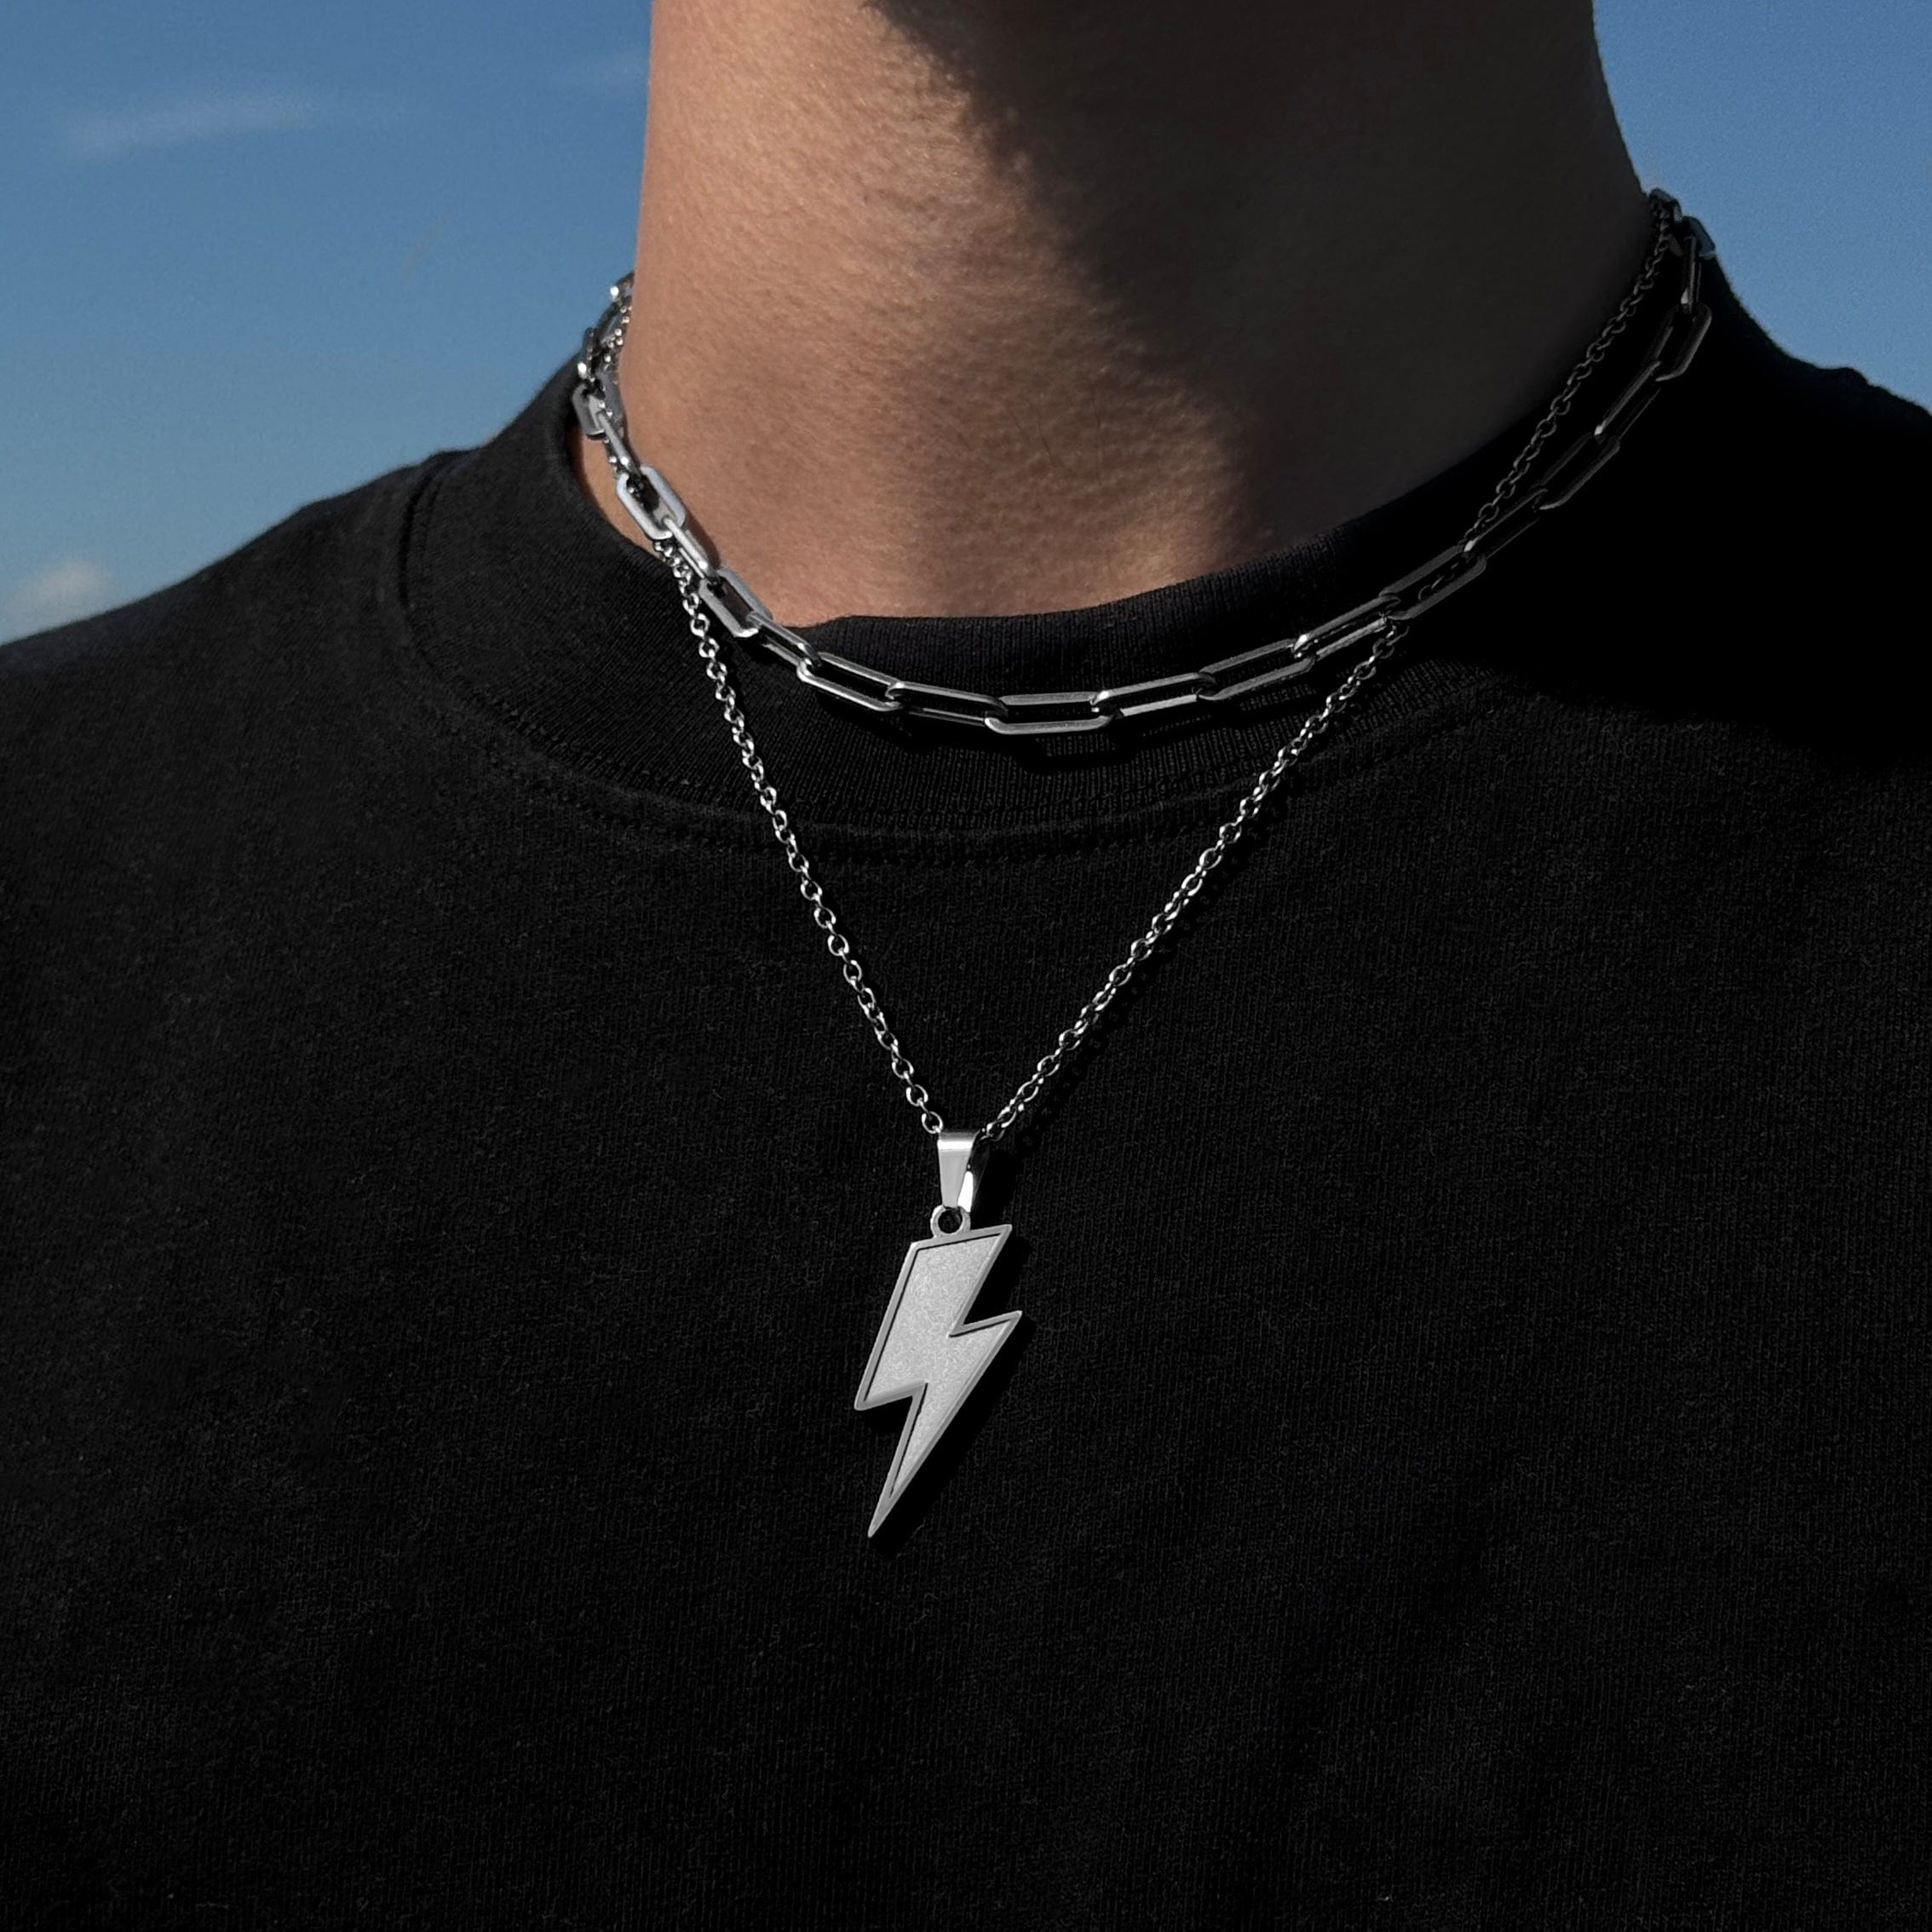 Chain with Pendant Lightning Rolo Chain - Silver (2mm) - JVillion®